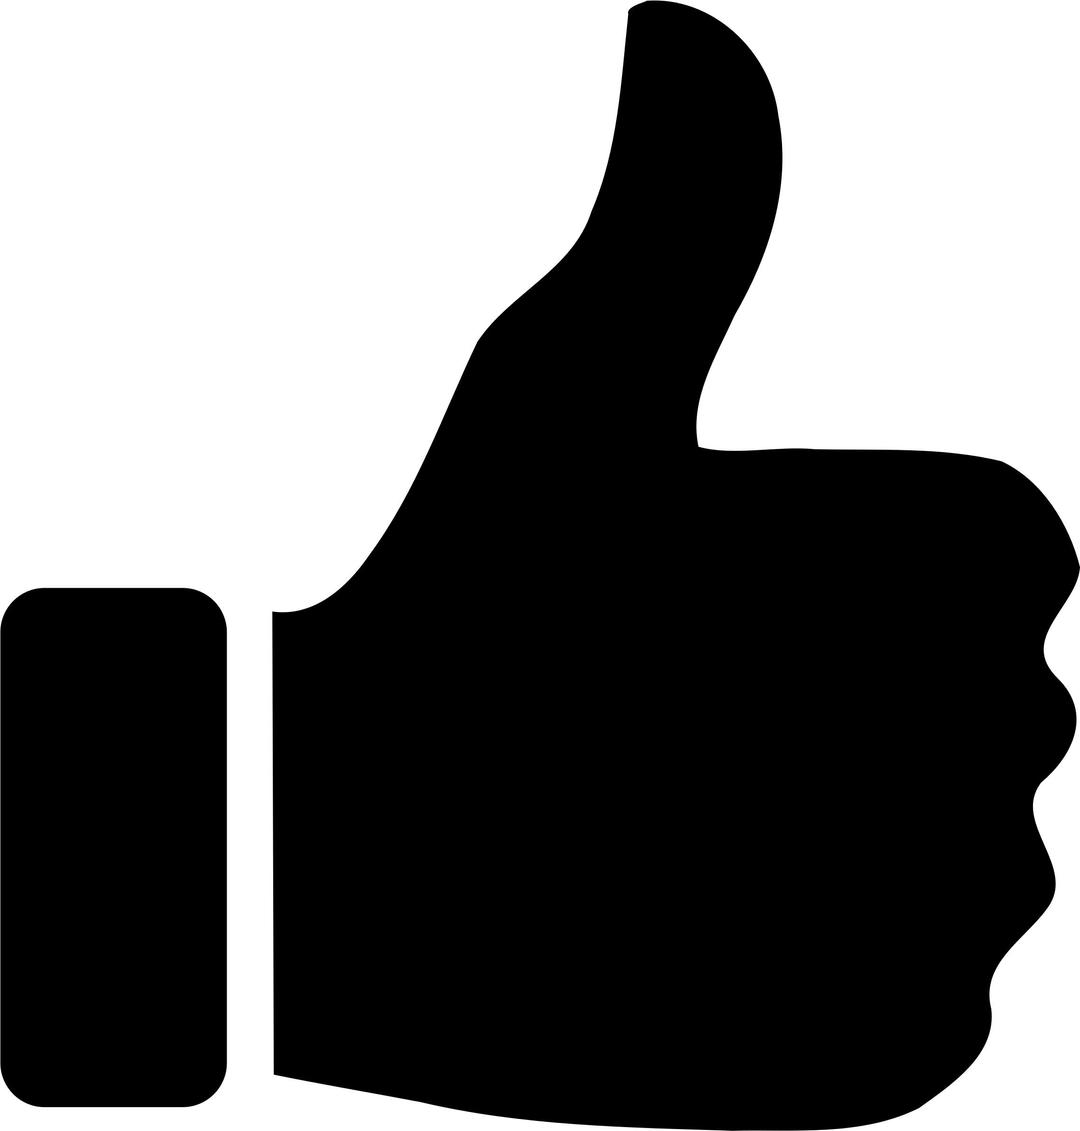 Thumbs-Up Silhouette Cleaned Up with an Extra Rinse Cycle png transparent